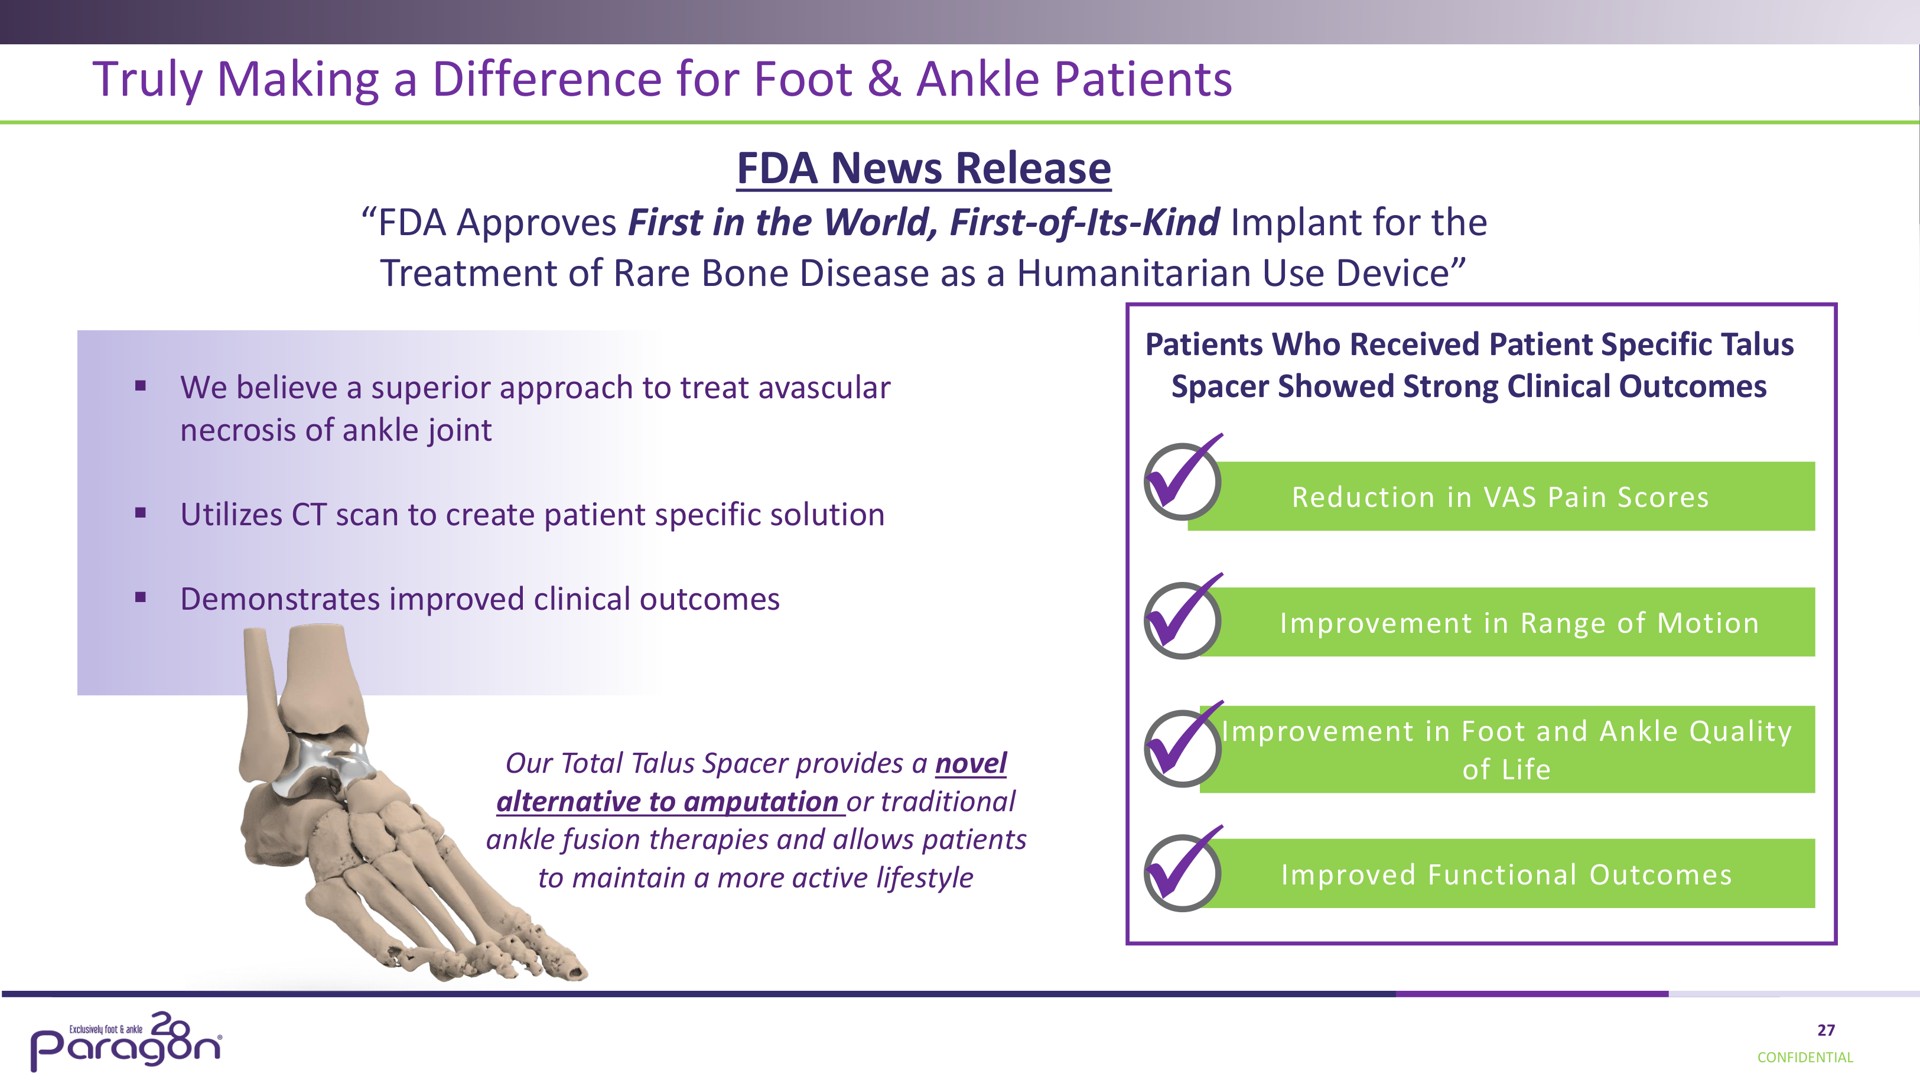 truly making a difference for foot ankle patients news release | Paragon28